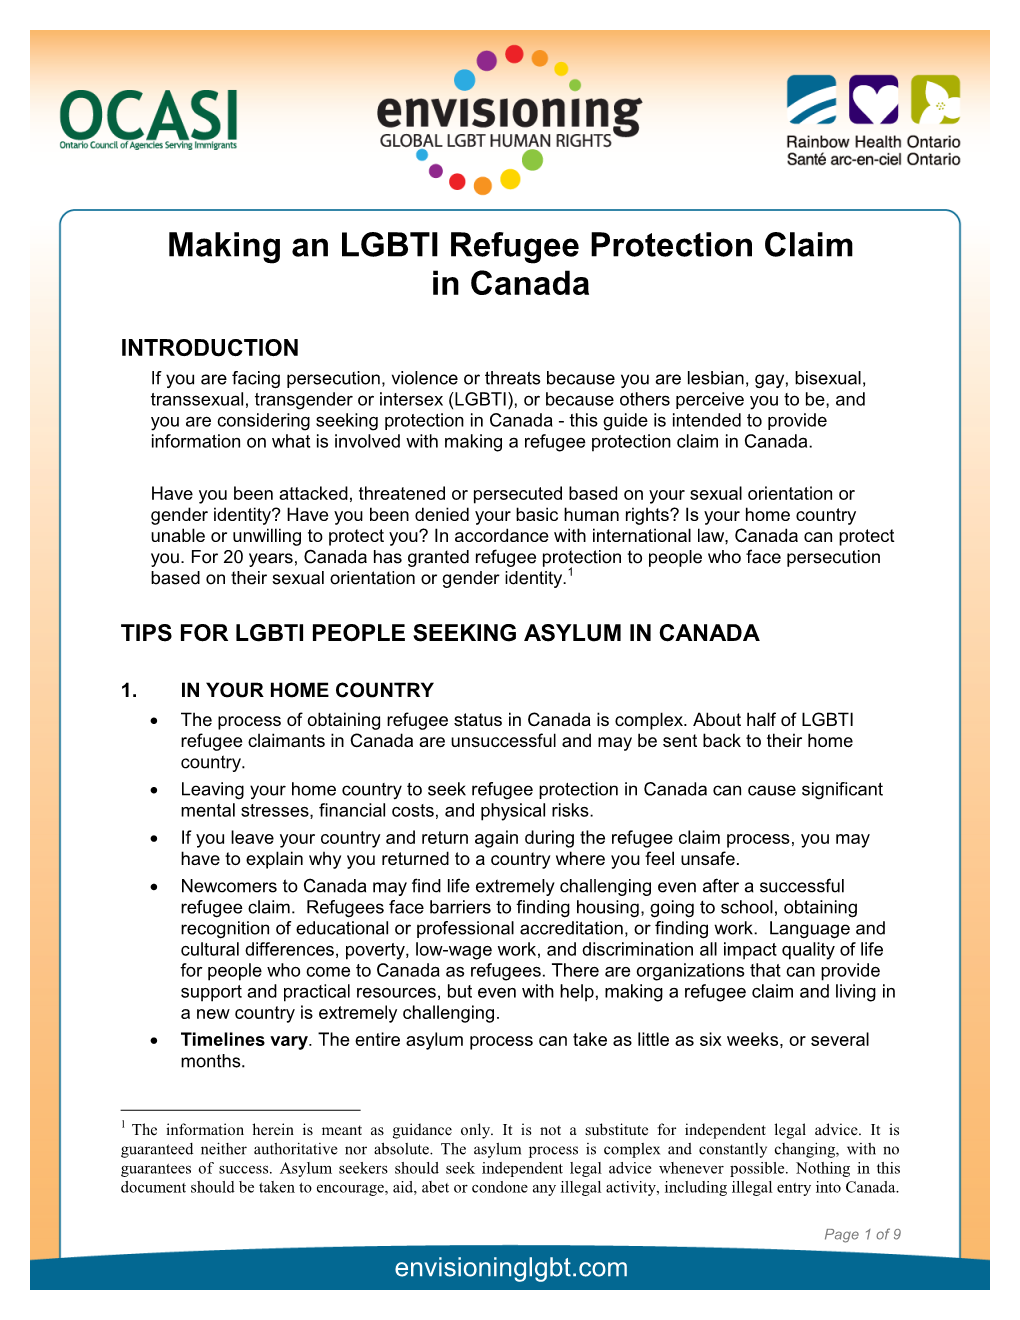 Making an LGBTI Refugee Protection Claim in Canada